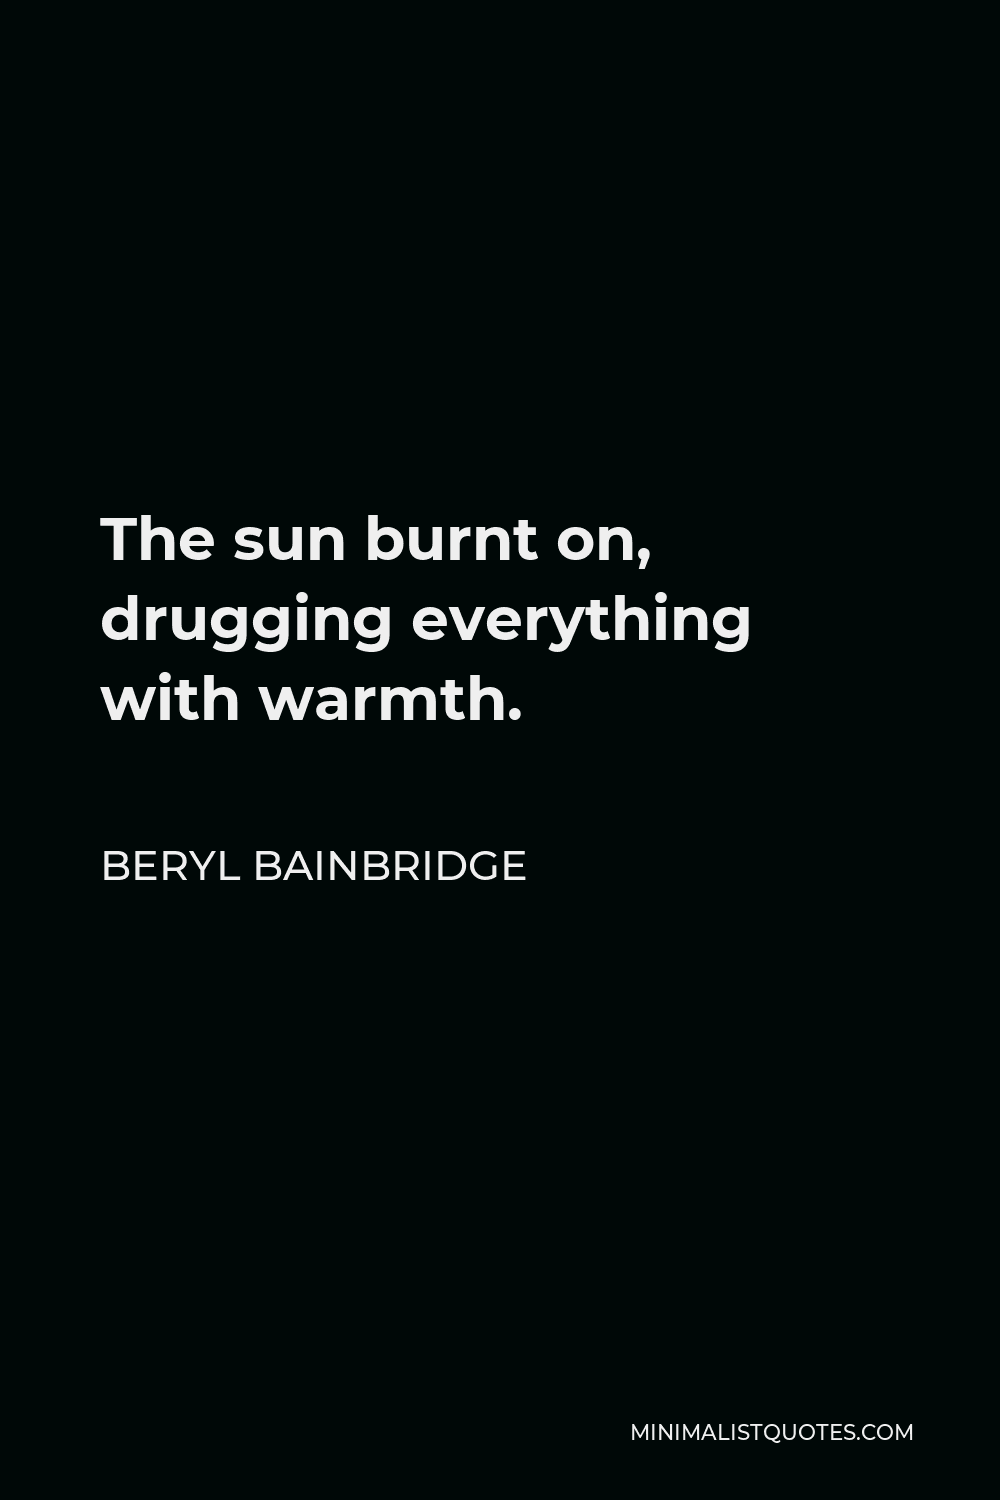 Beryl Bainbridge Quote - The sun burnt on, drugging everything with warmth.